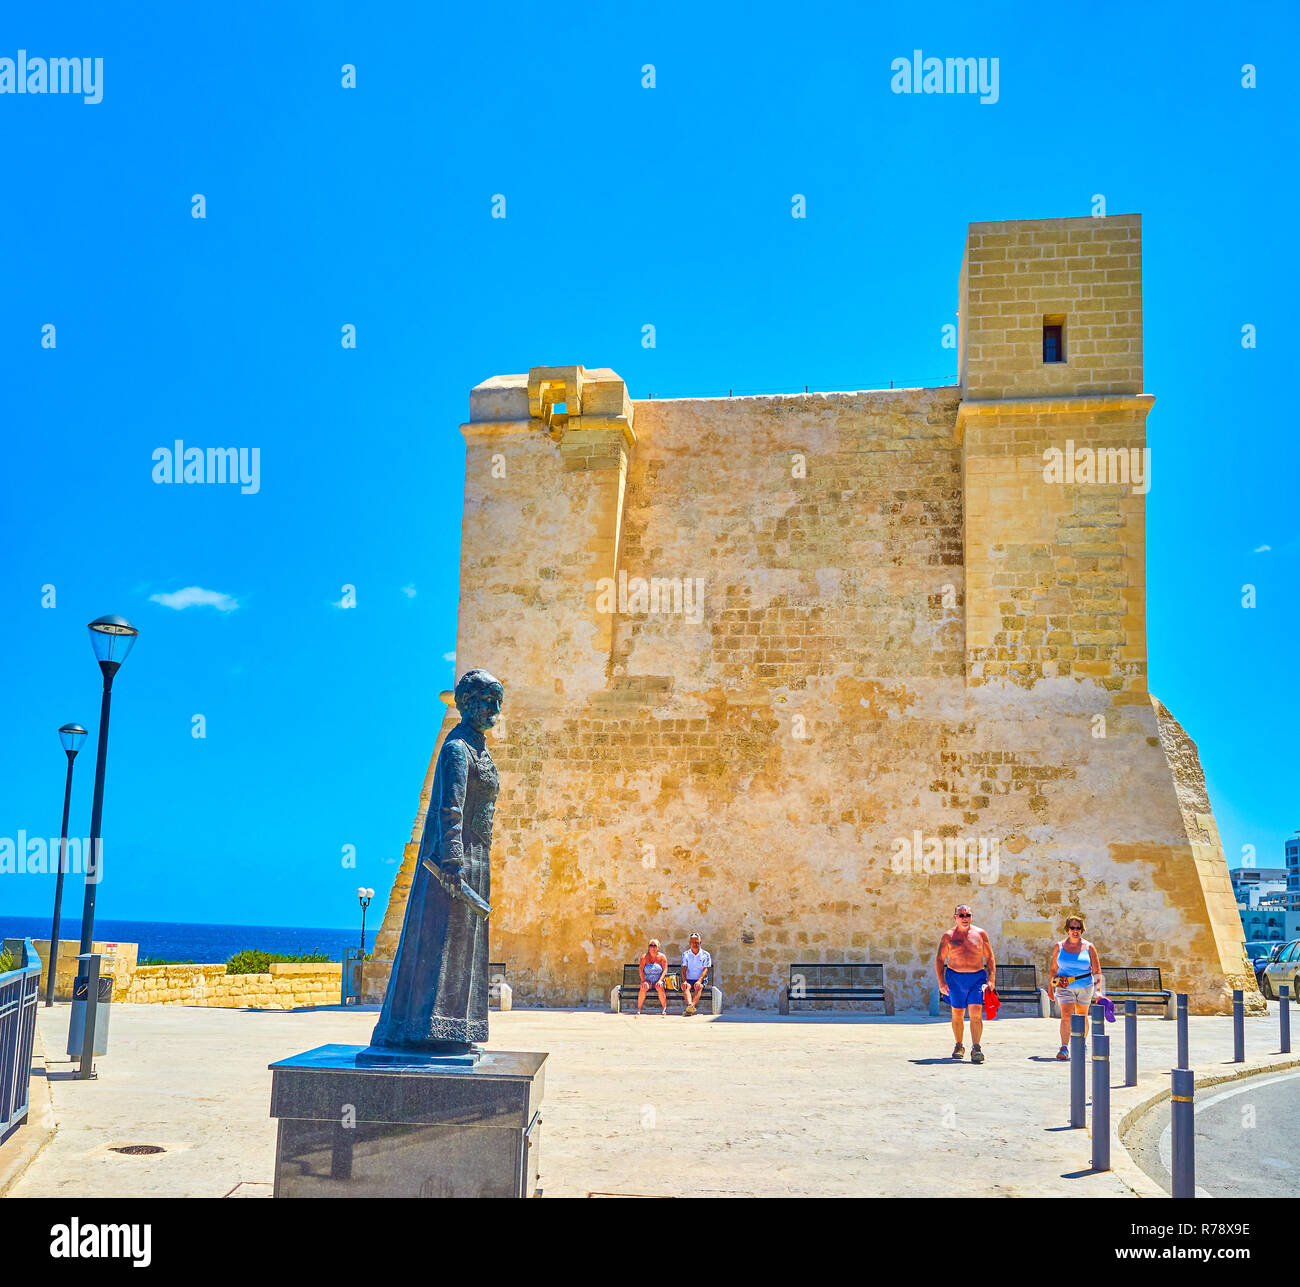 BUGIBBA, MALTA - JUNE 14, 2018: The Wignacourt Tower was  important fortified structures in north of Malta, nowadays is a popular tourist destination  Stock Photo